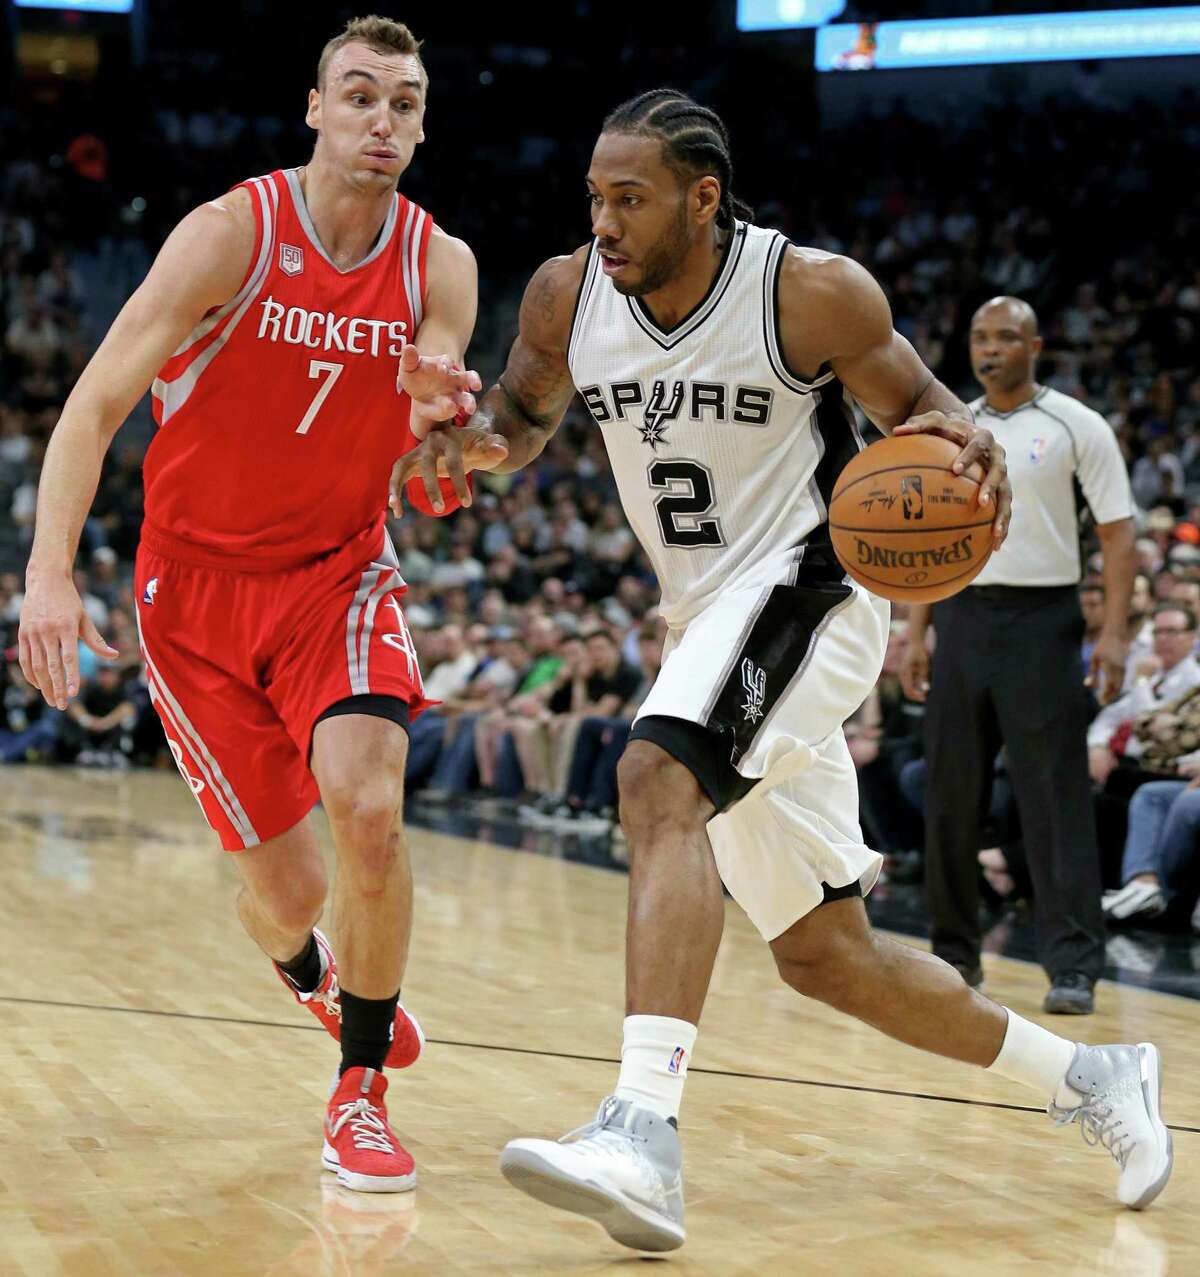 Here are the highlights from Kawhi Leonard's monstrous fourth quarter against the Rockets6:49 - 13-foot step back jumper, 91-96